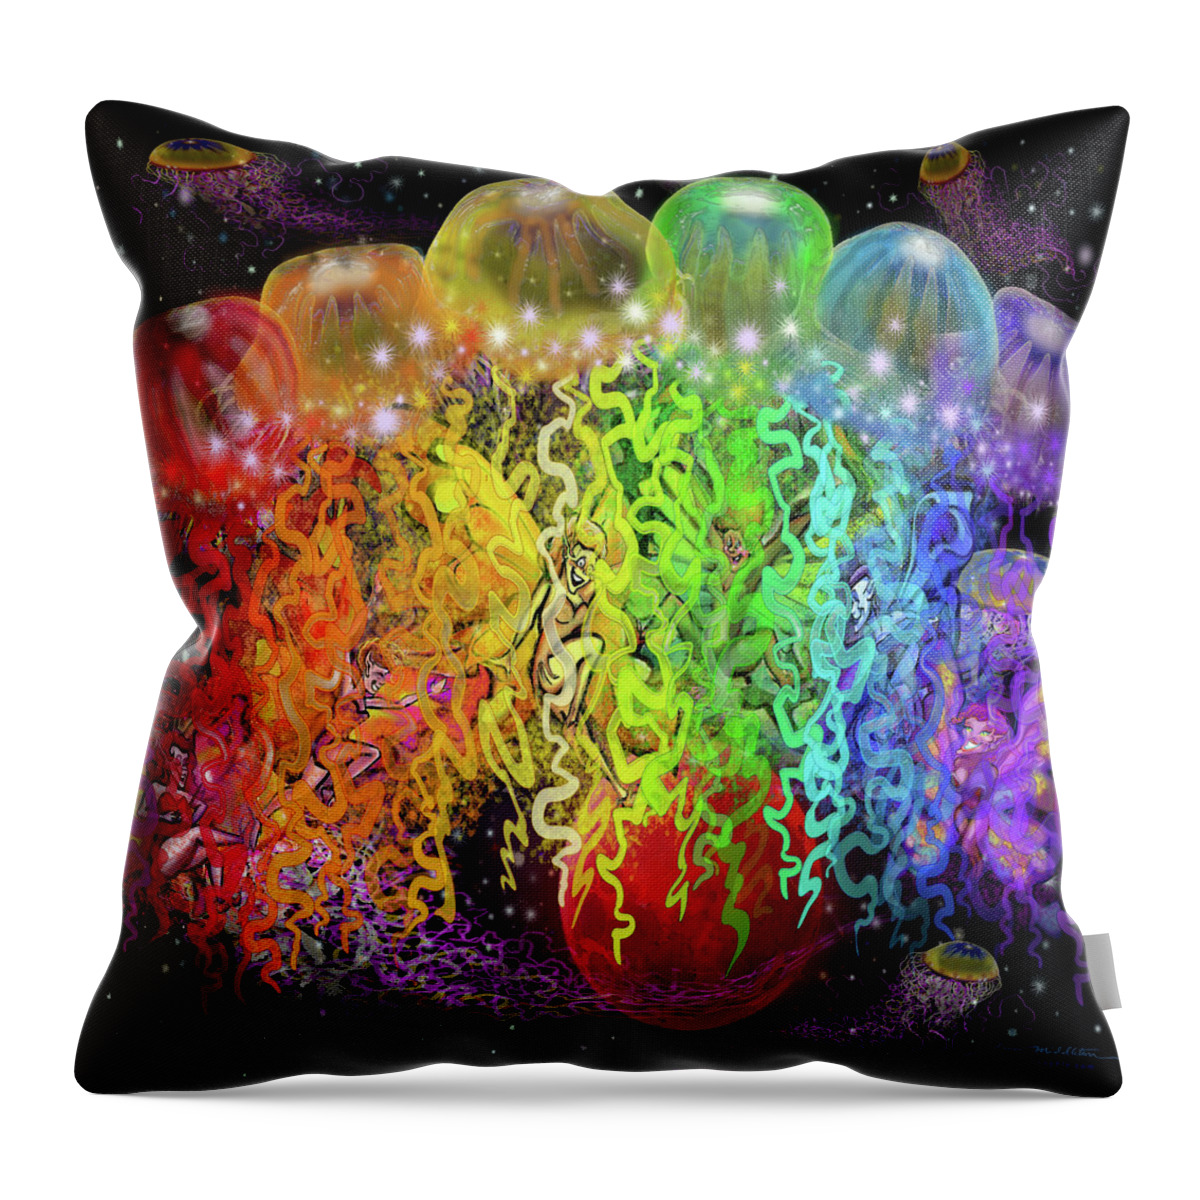 Space Throw Pillow featuring the digital art Space Pixies n Jellyfish by Kevin Middleton